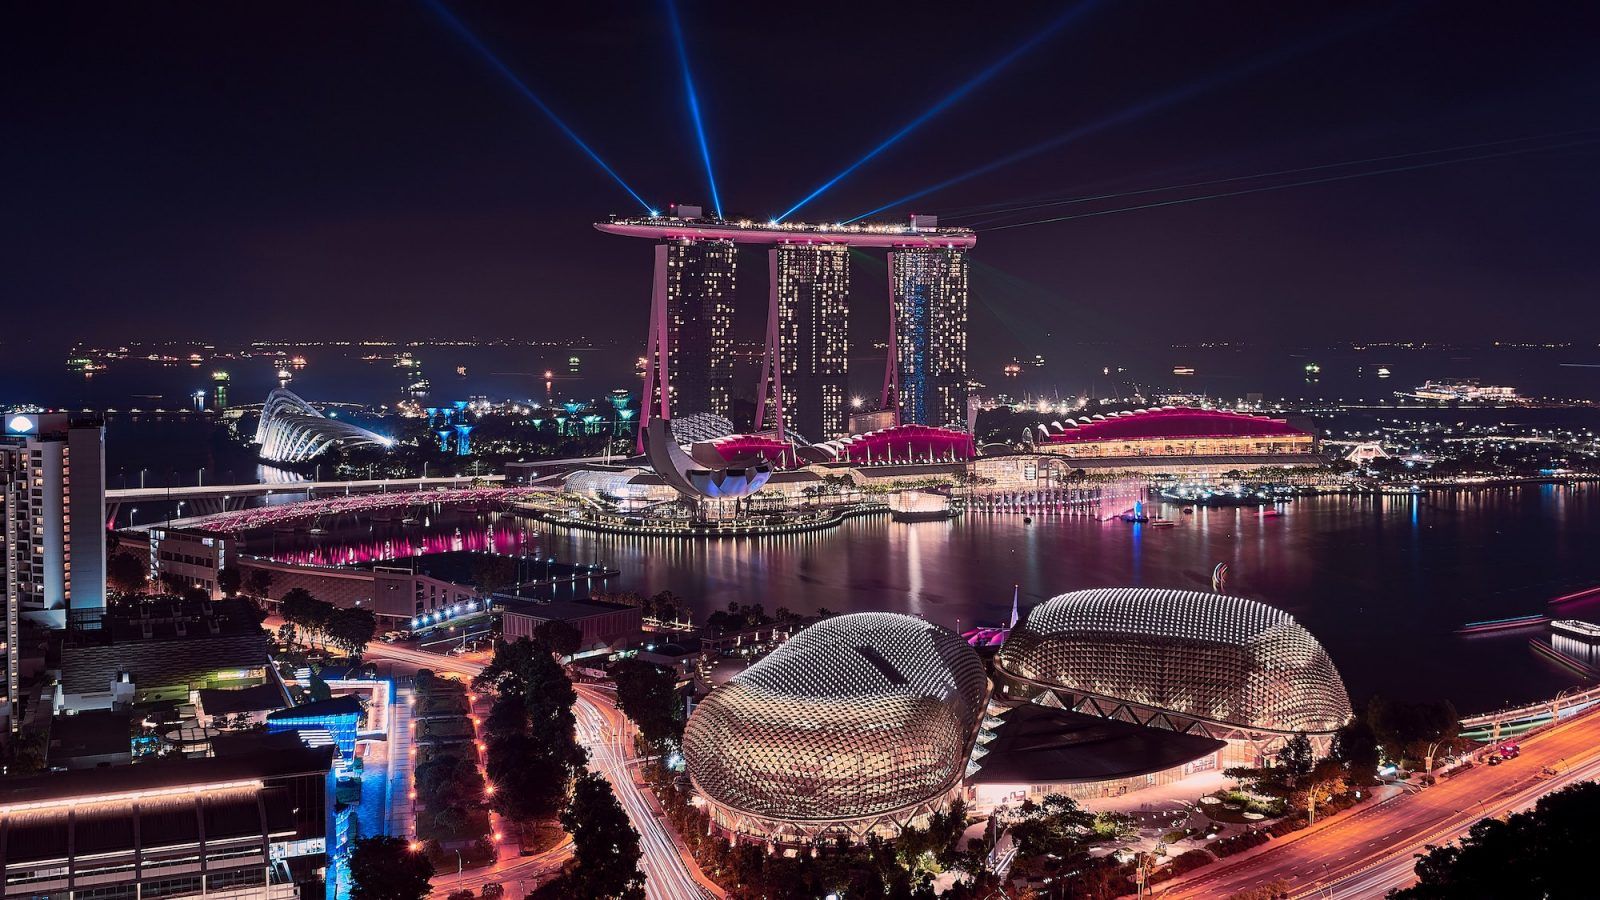 F1 Singapore Race Themed Events During Singapore Grand Prix 2022